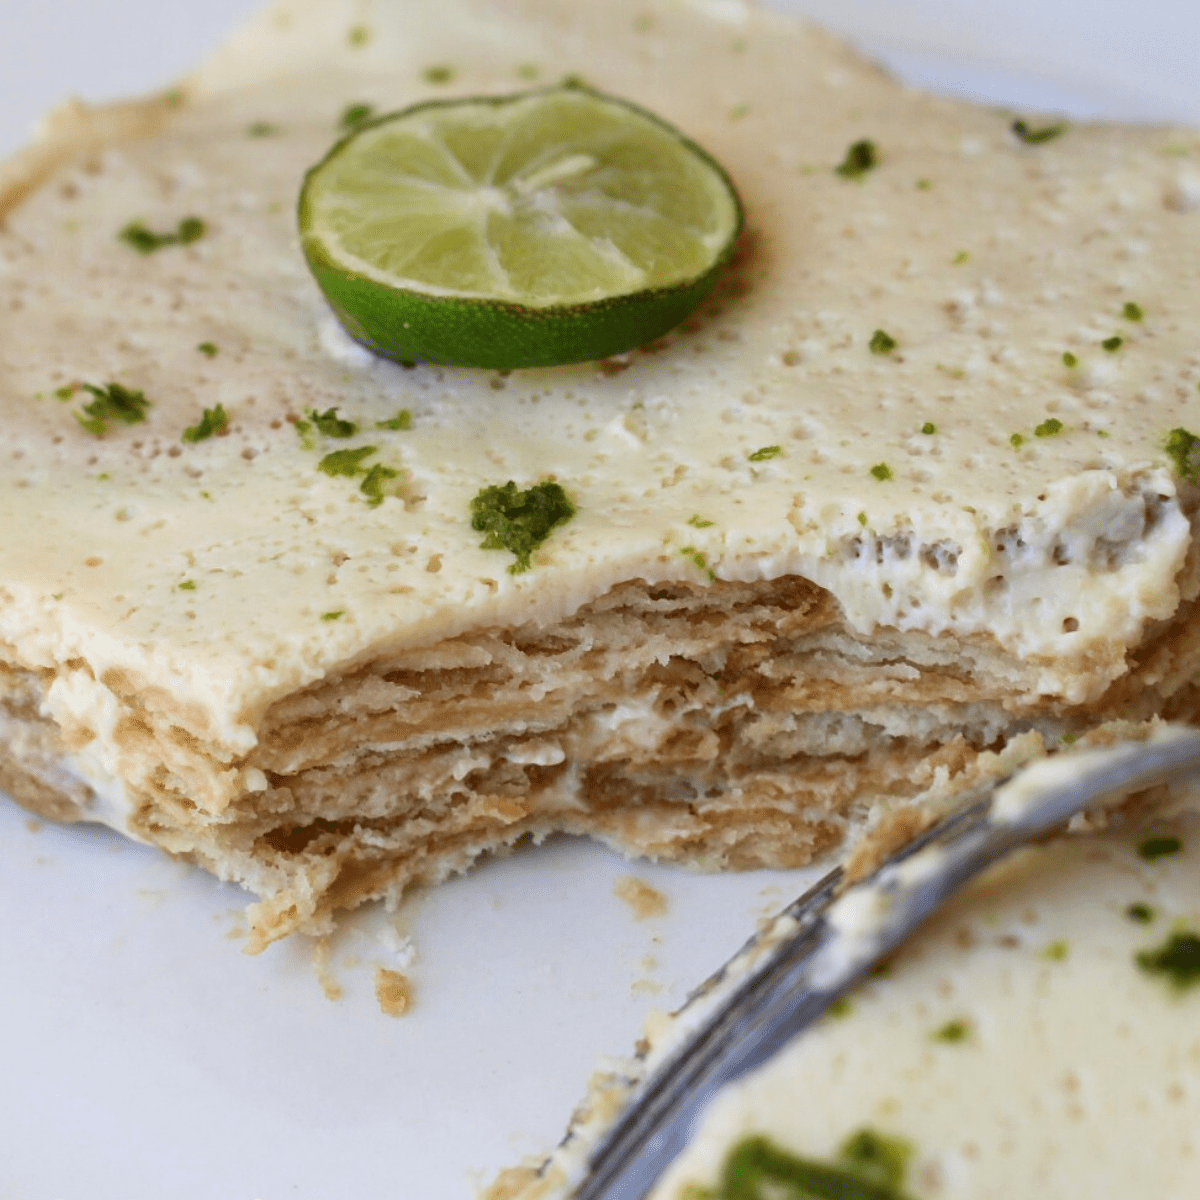 A fork cutting into the lime cake and showing the layers of the dessert.